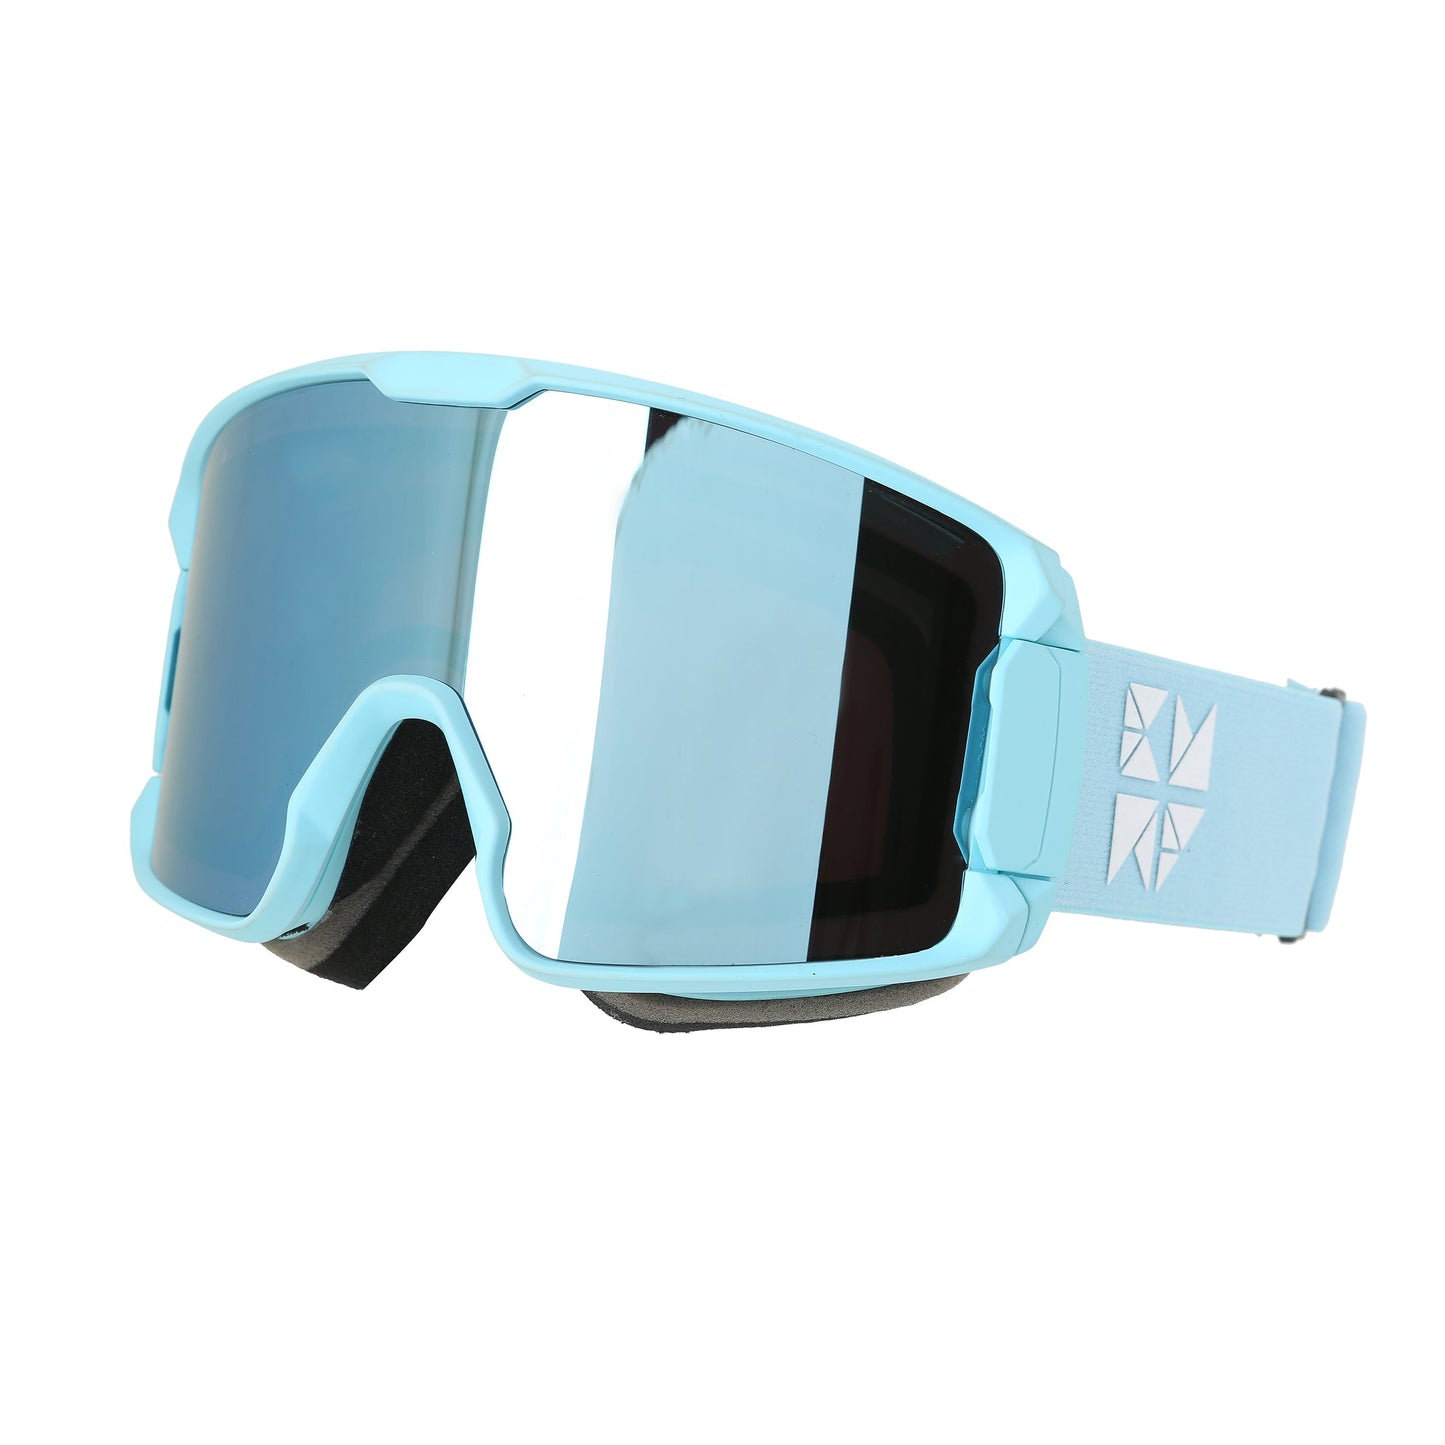 Retro Cylindrical Snow Goggles Emerald Lens